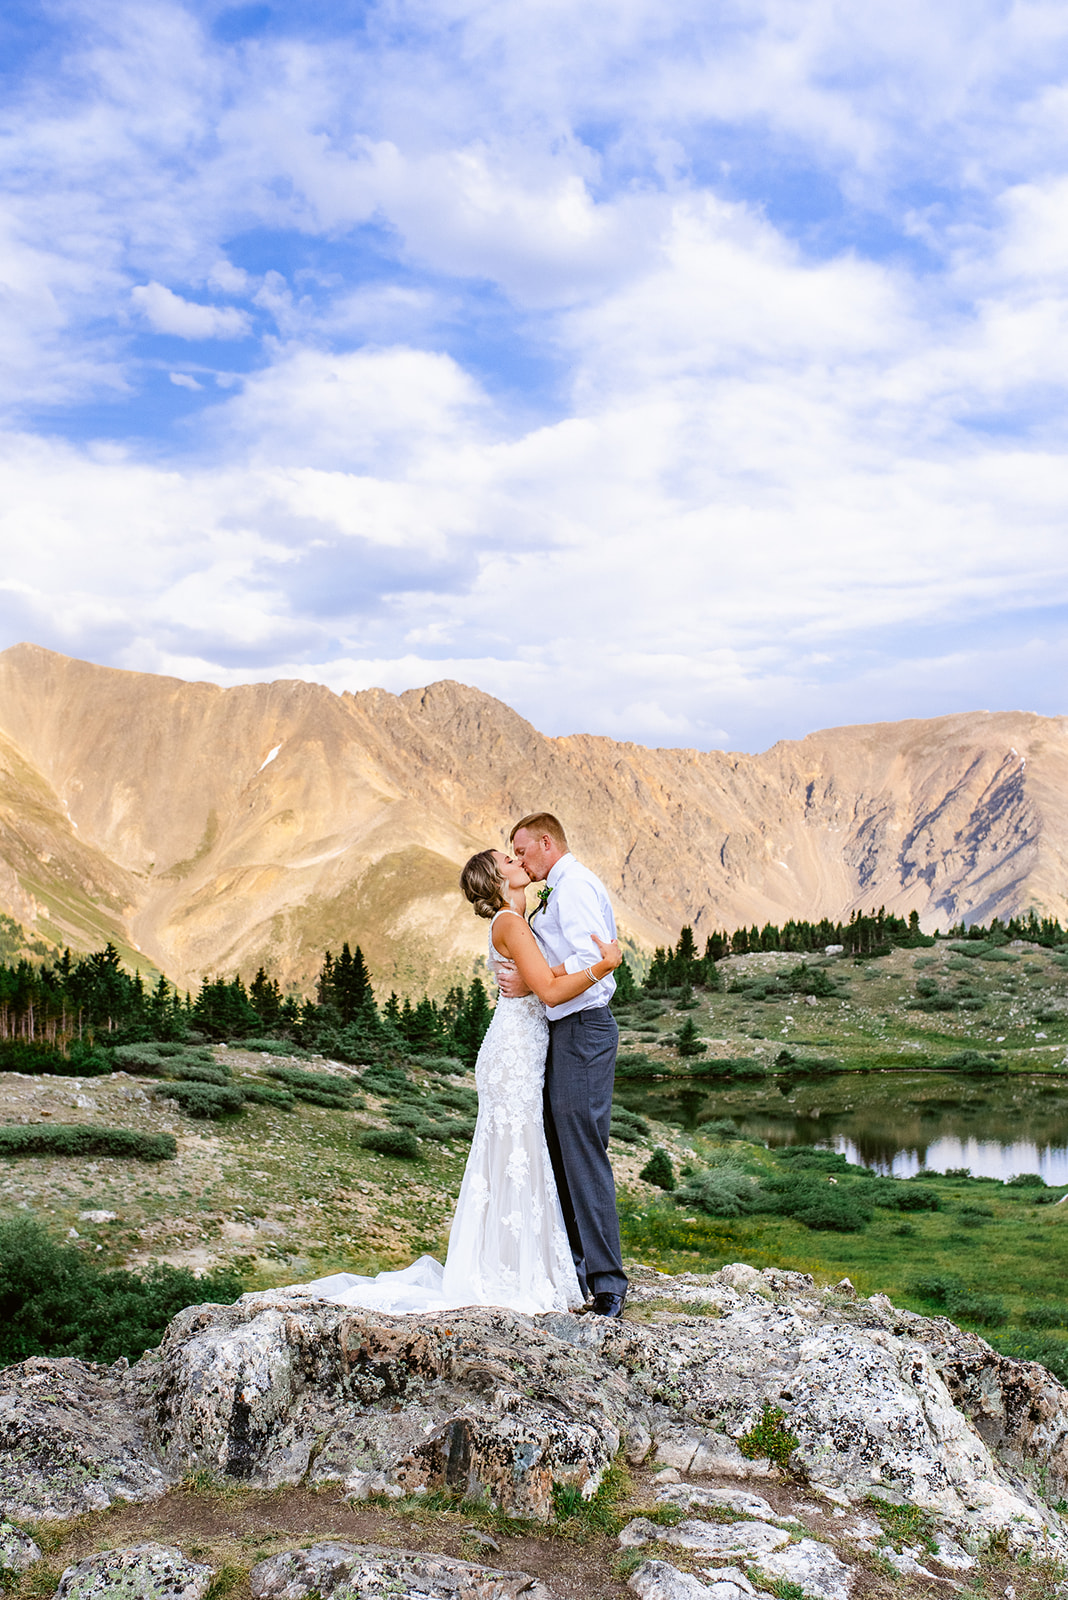 Intimate Elopement in the Rocky Mountains